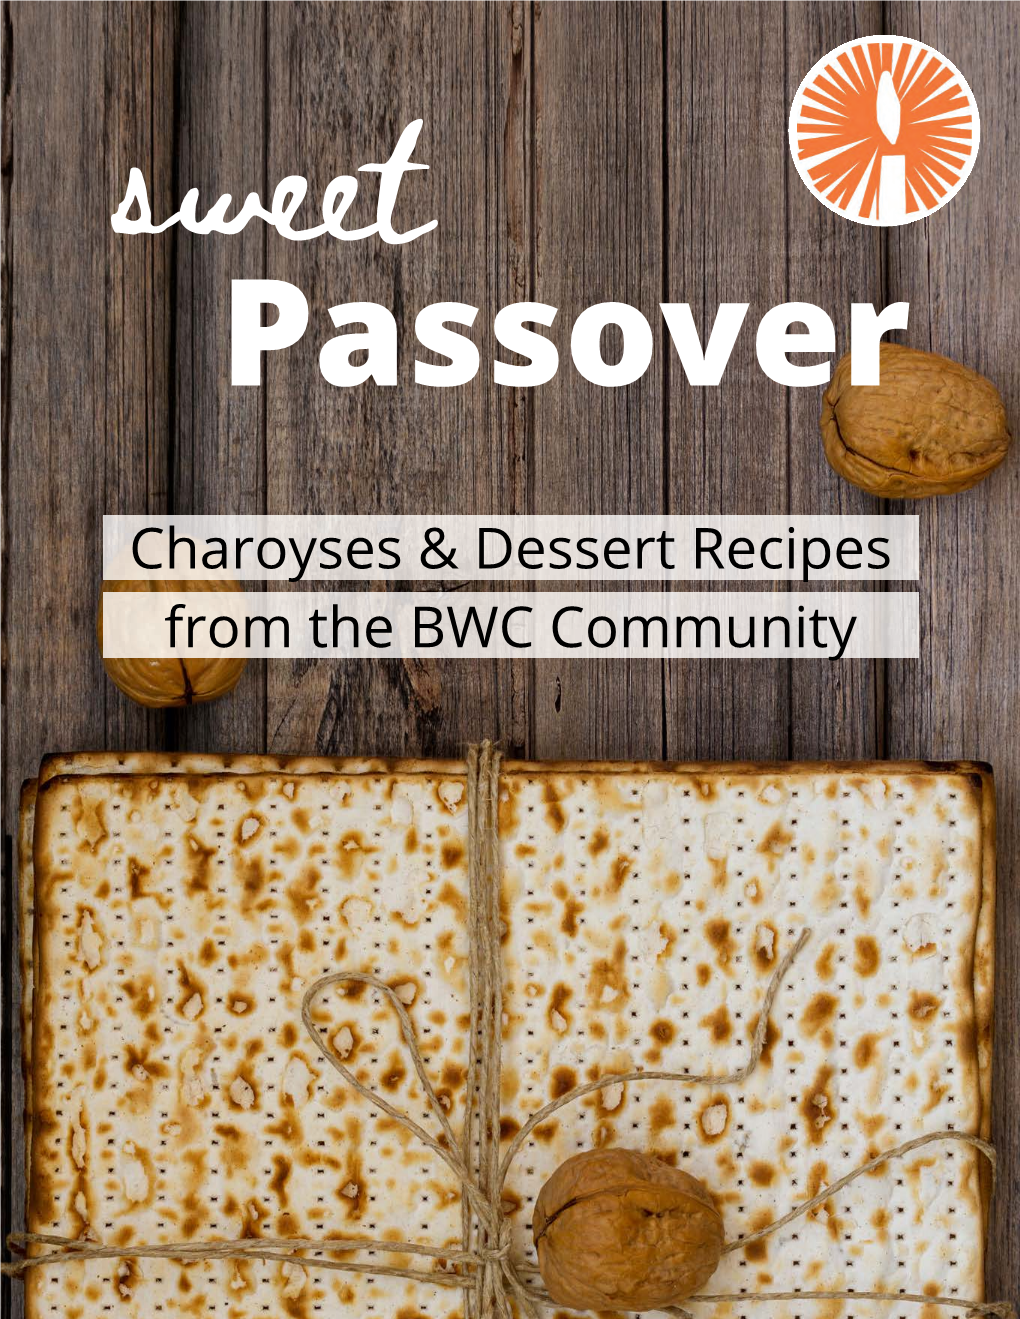 Charoyses & Dessert Recipes from the BWC Community